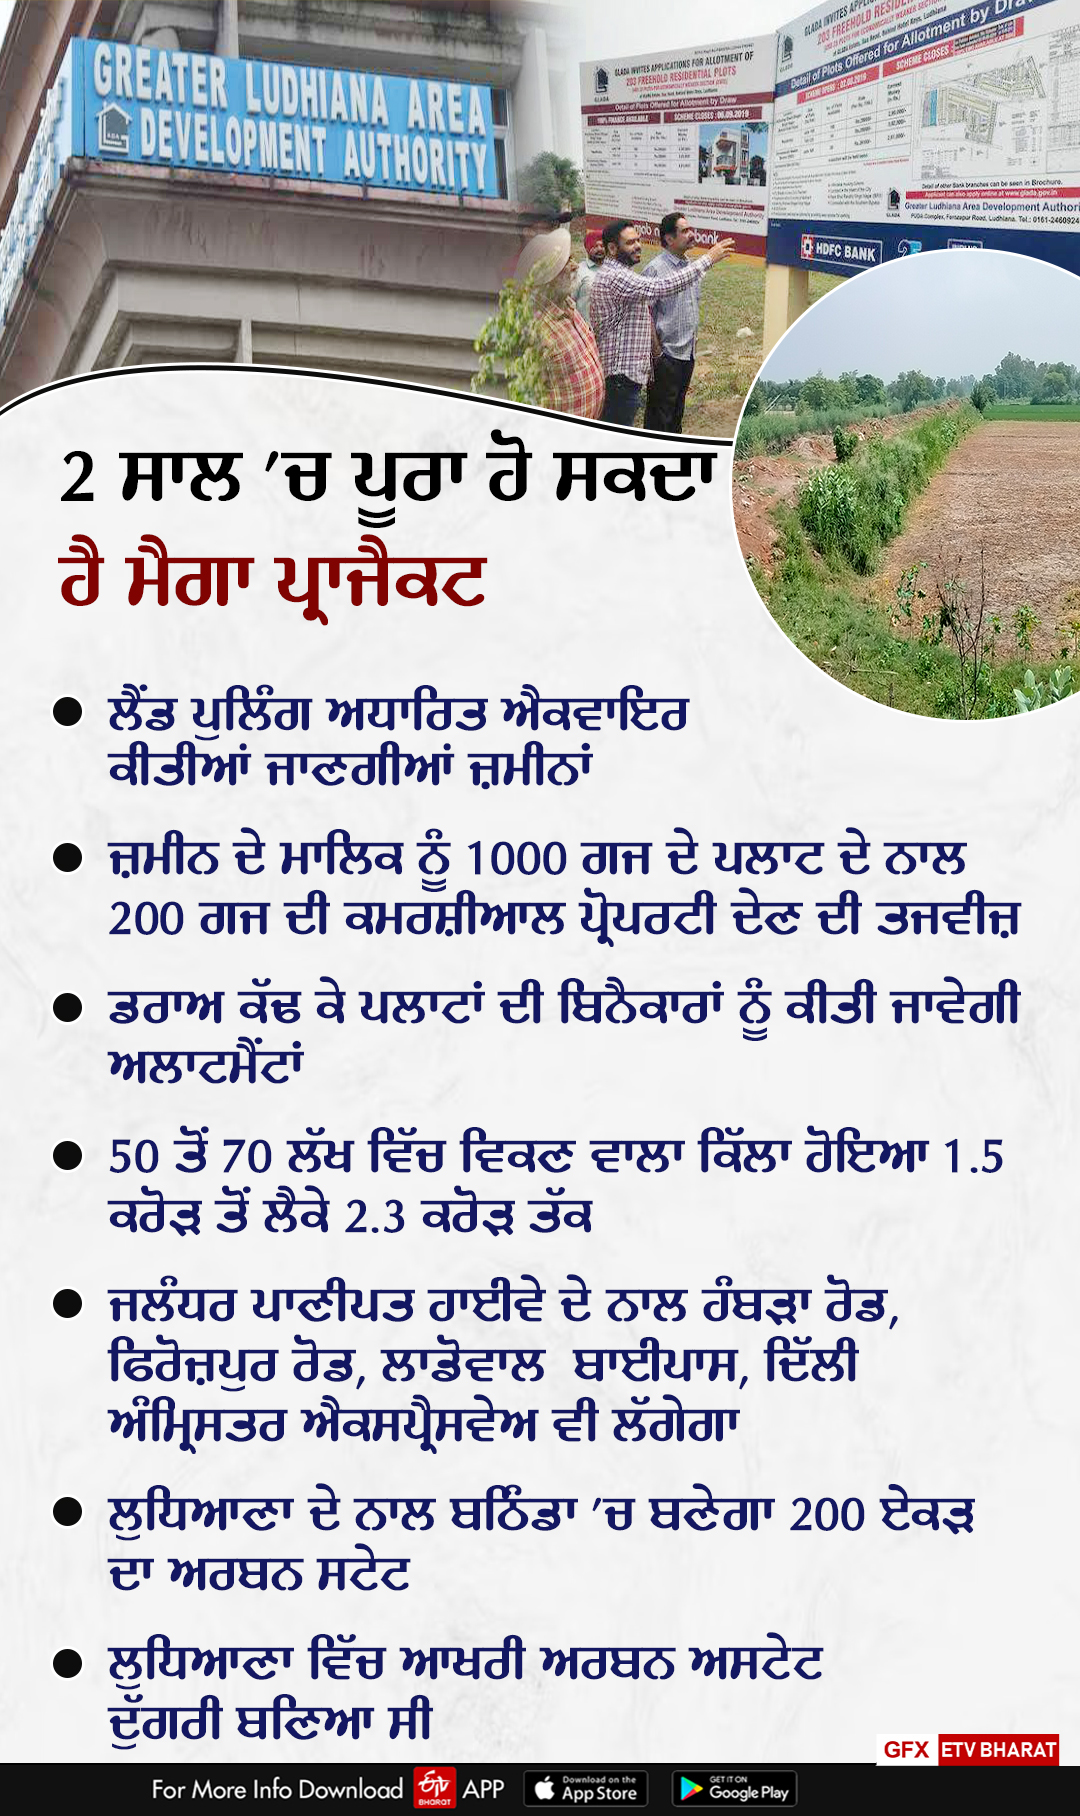 Flats in Ludhiana, Flats By Punjab Government